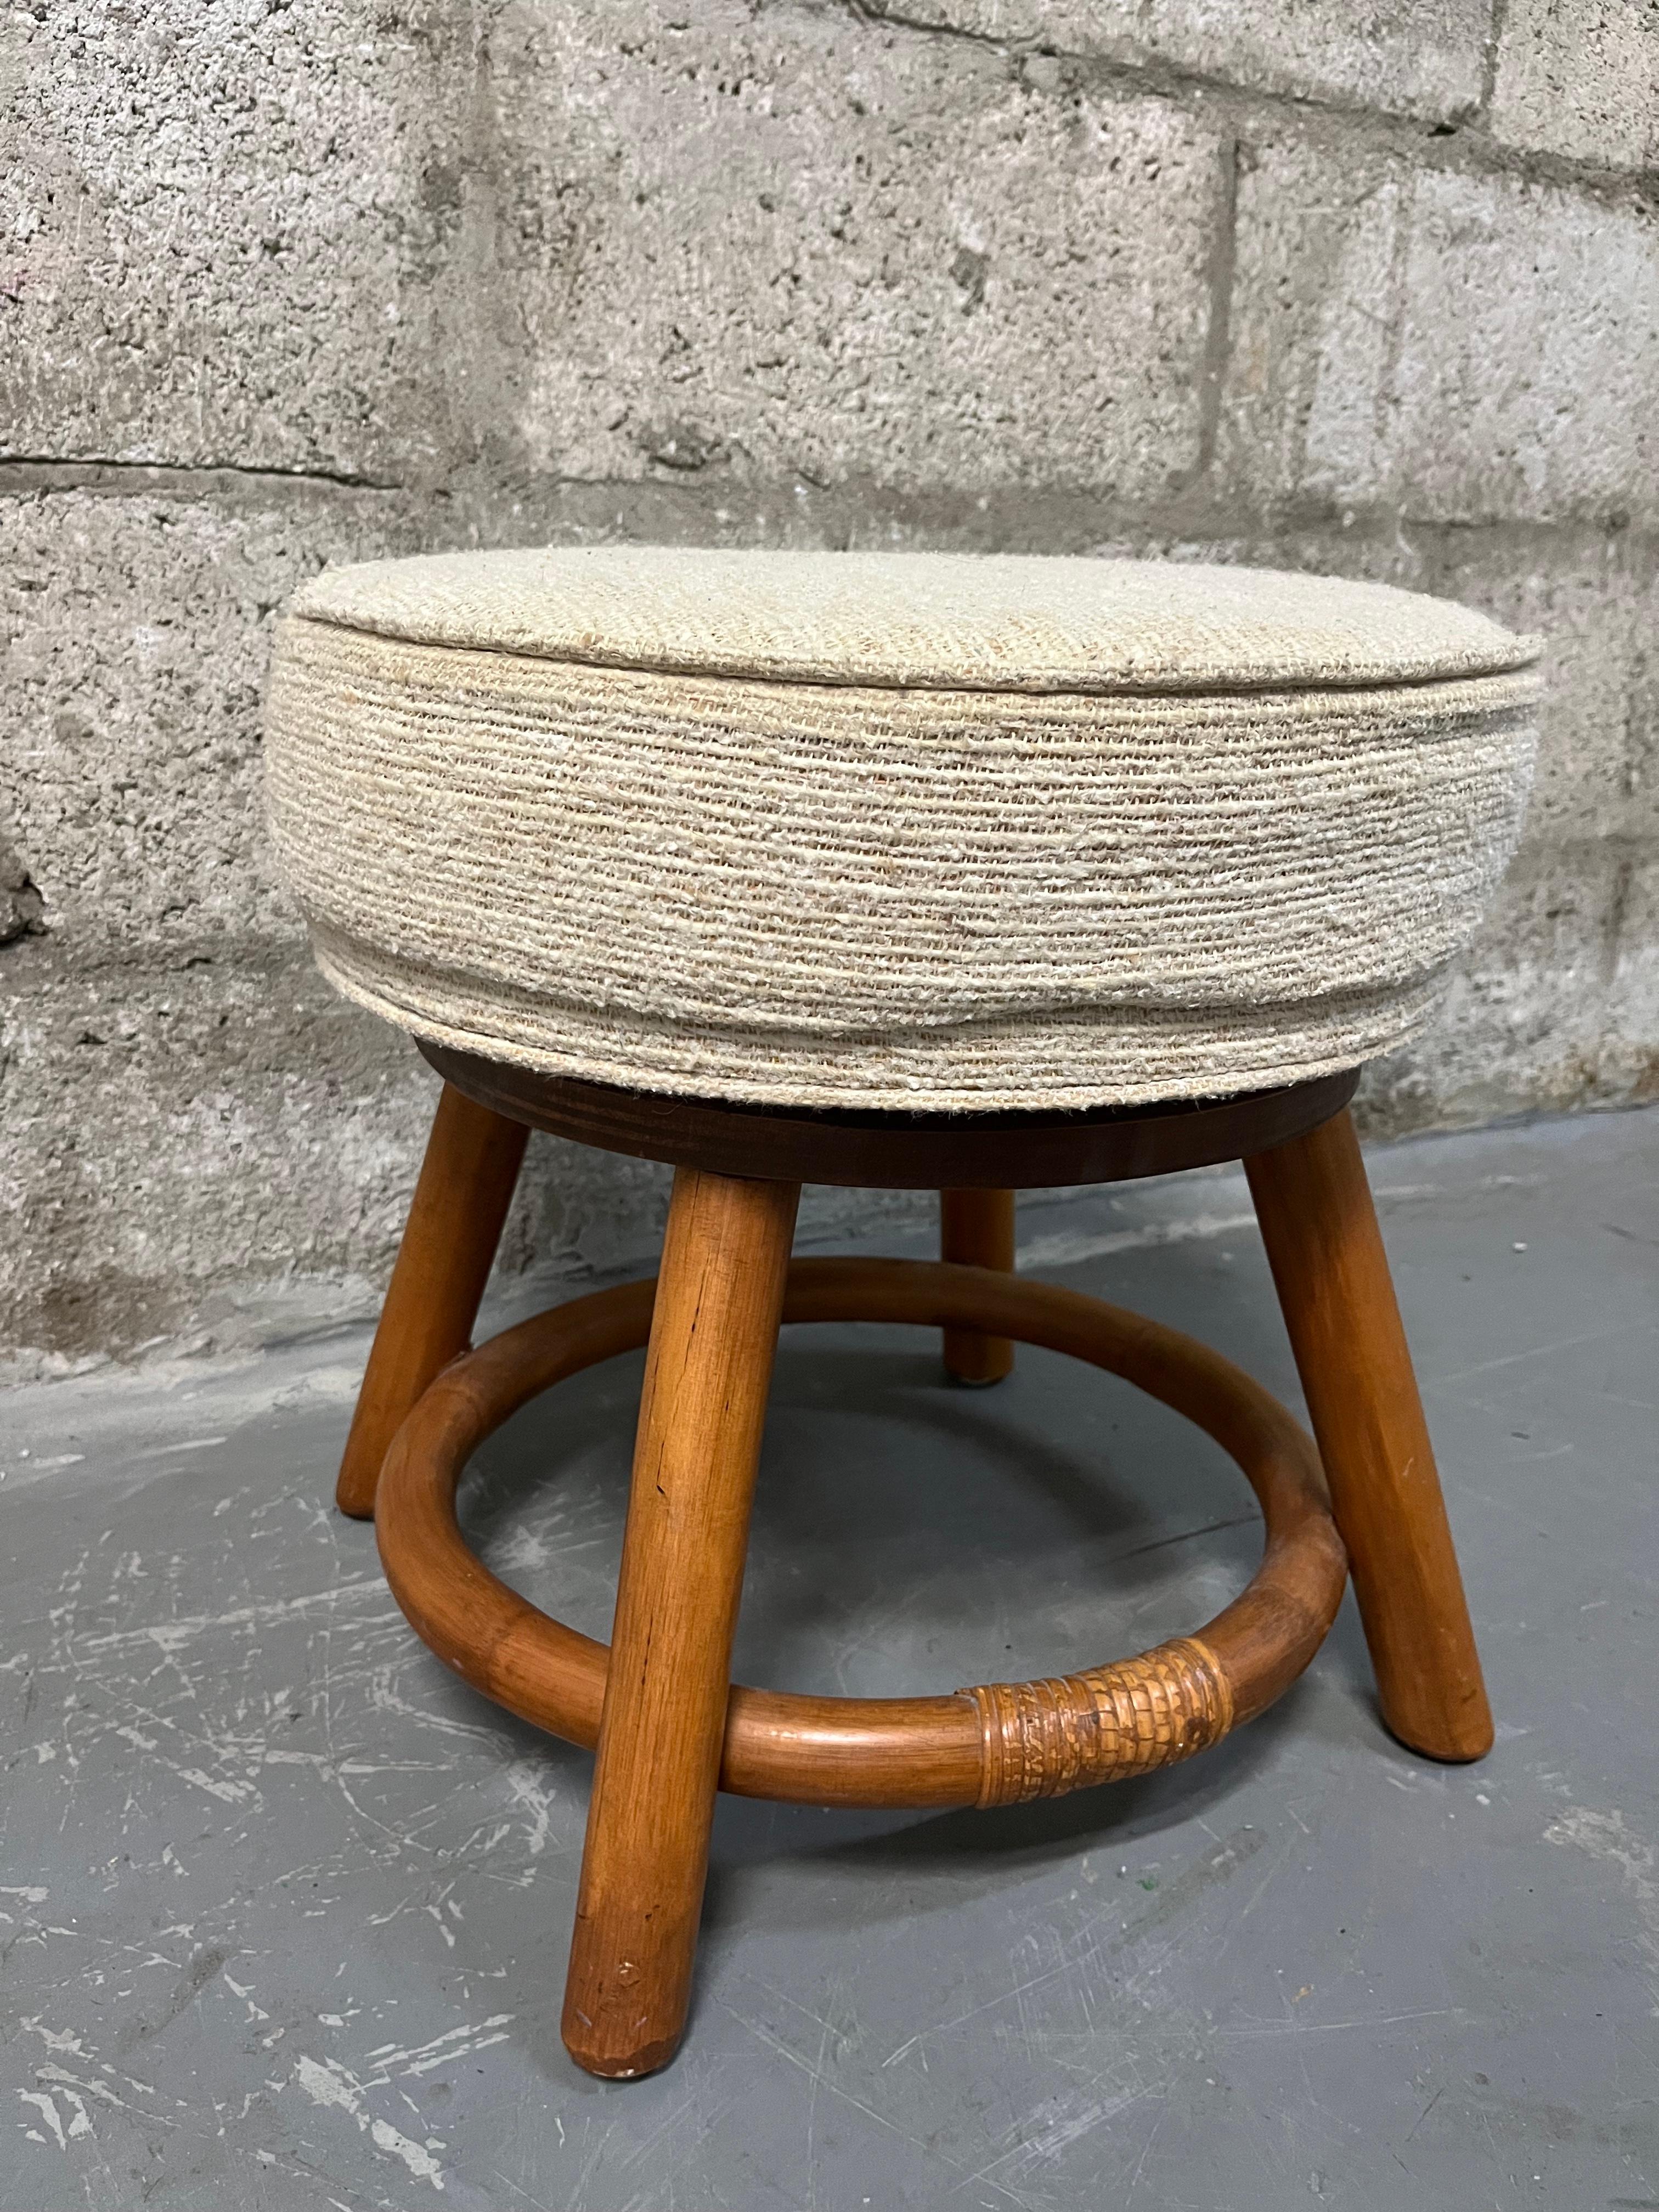 Bamboo Rattan Wicker Swivel Footstool in the Paul Frankl's Style. Circa 1970s  For Sale 6